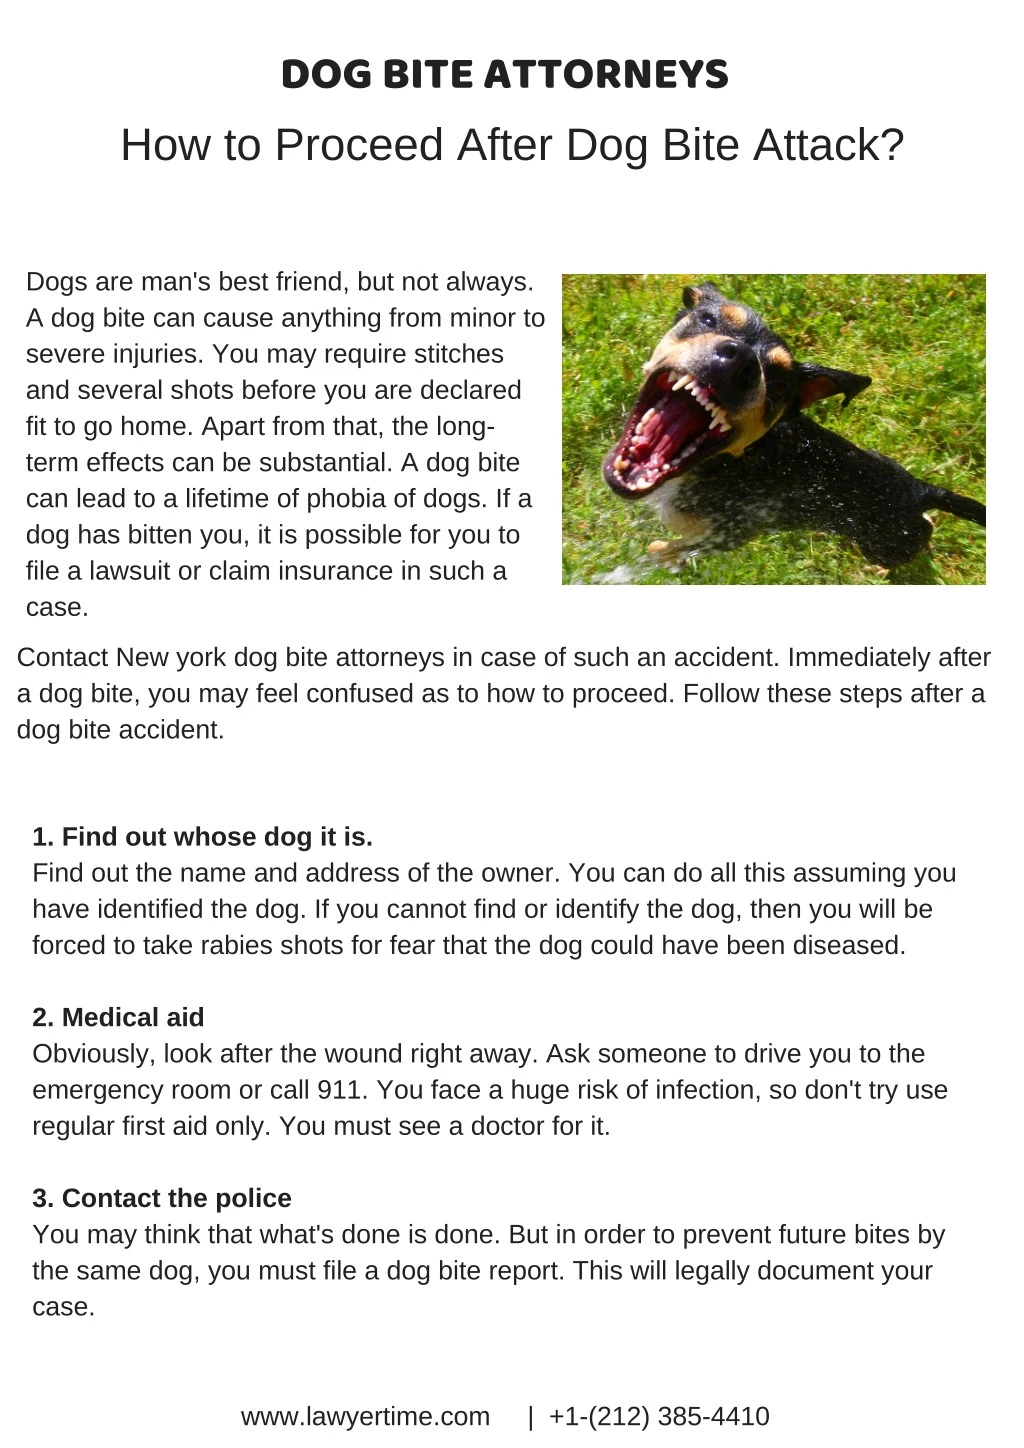 dog bite attorneys how to proceed after dog bite